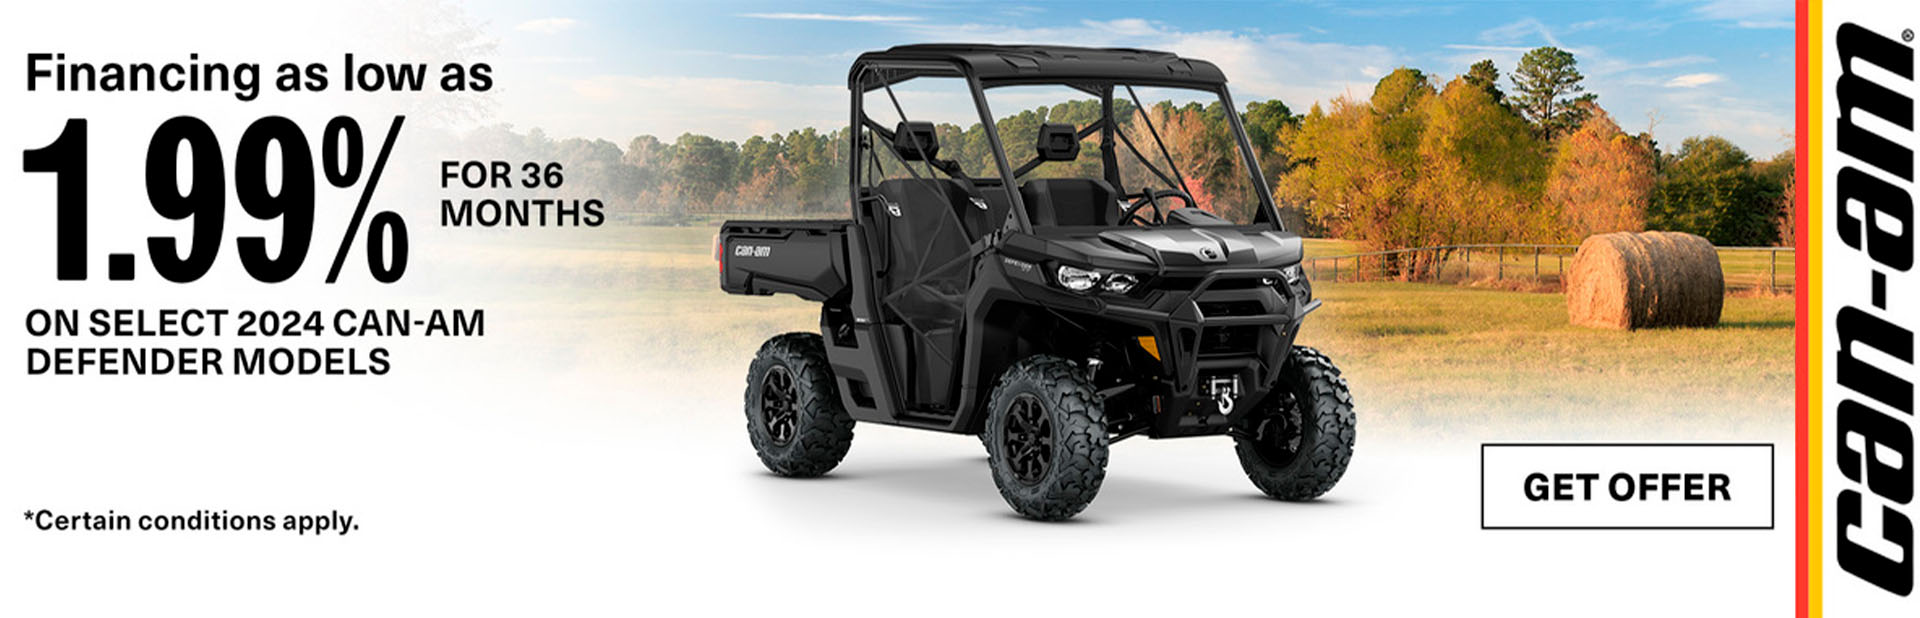 Financing as low as 1.99% for 36-months on select 2024 Can-Am SSV models